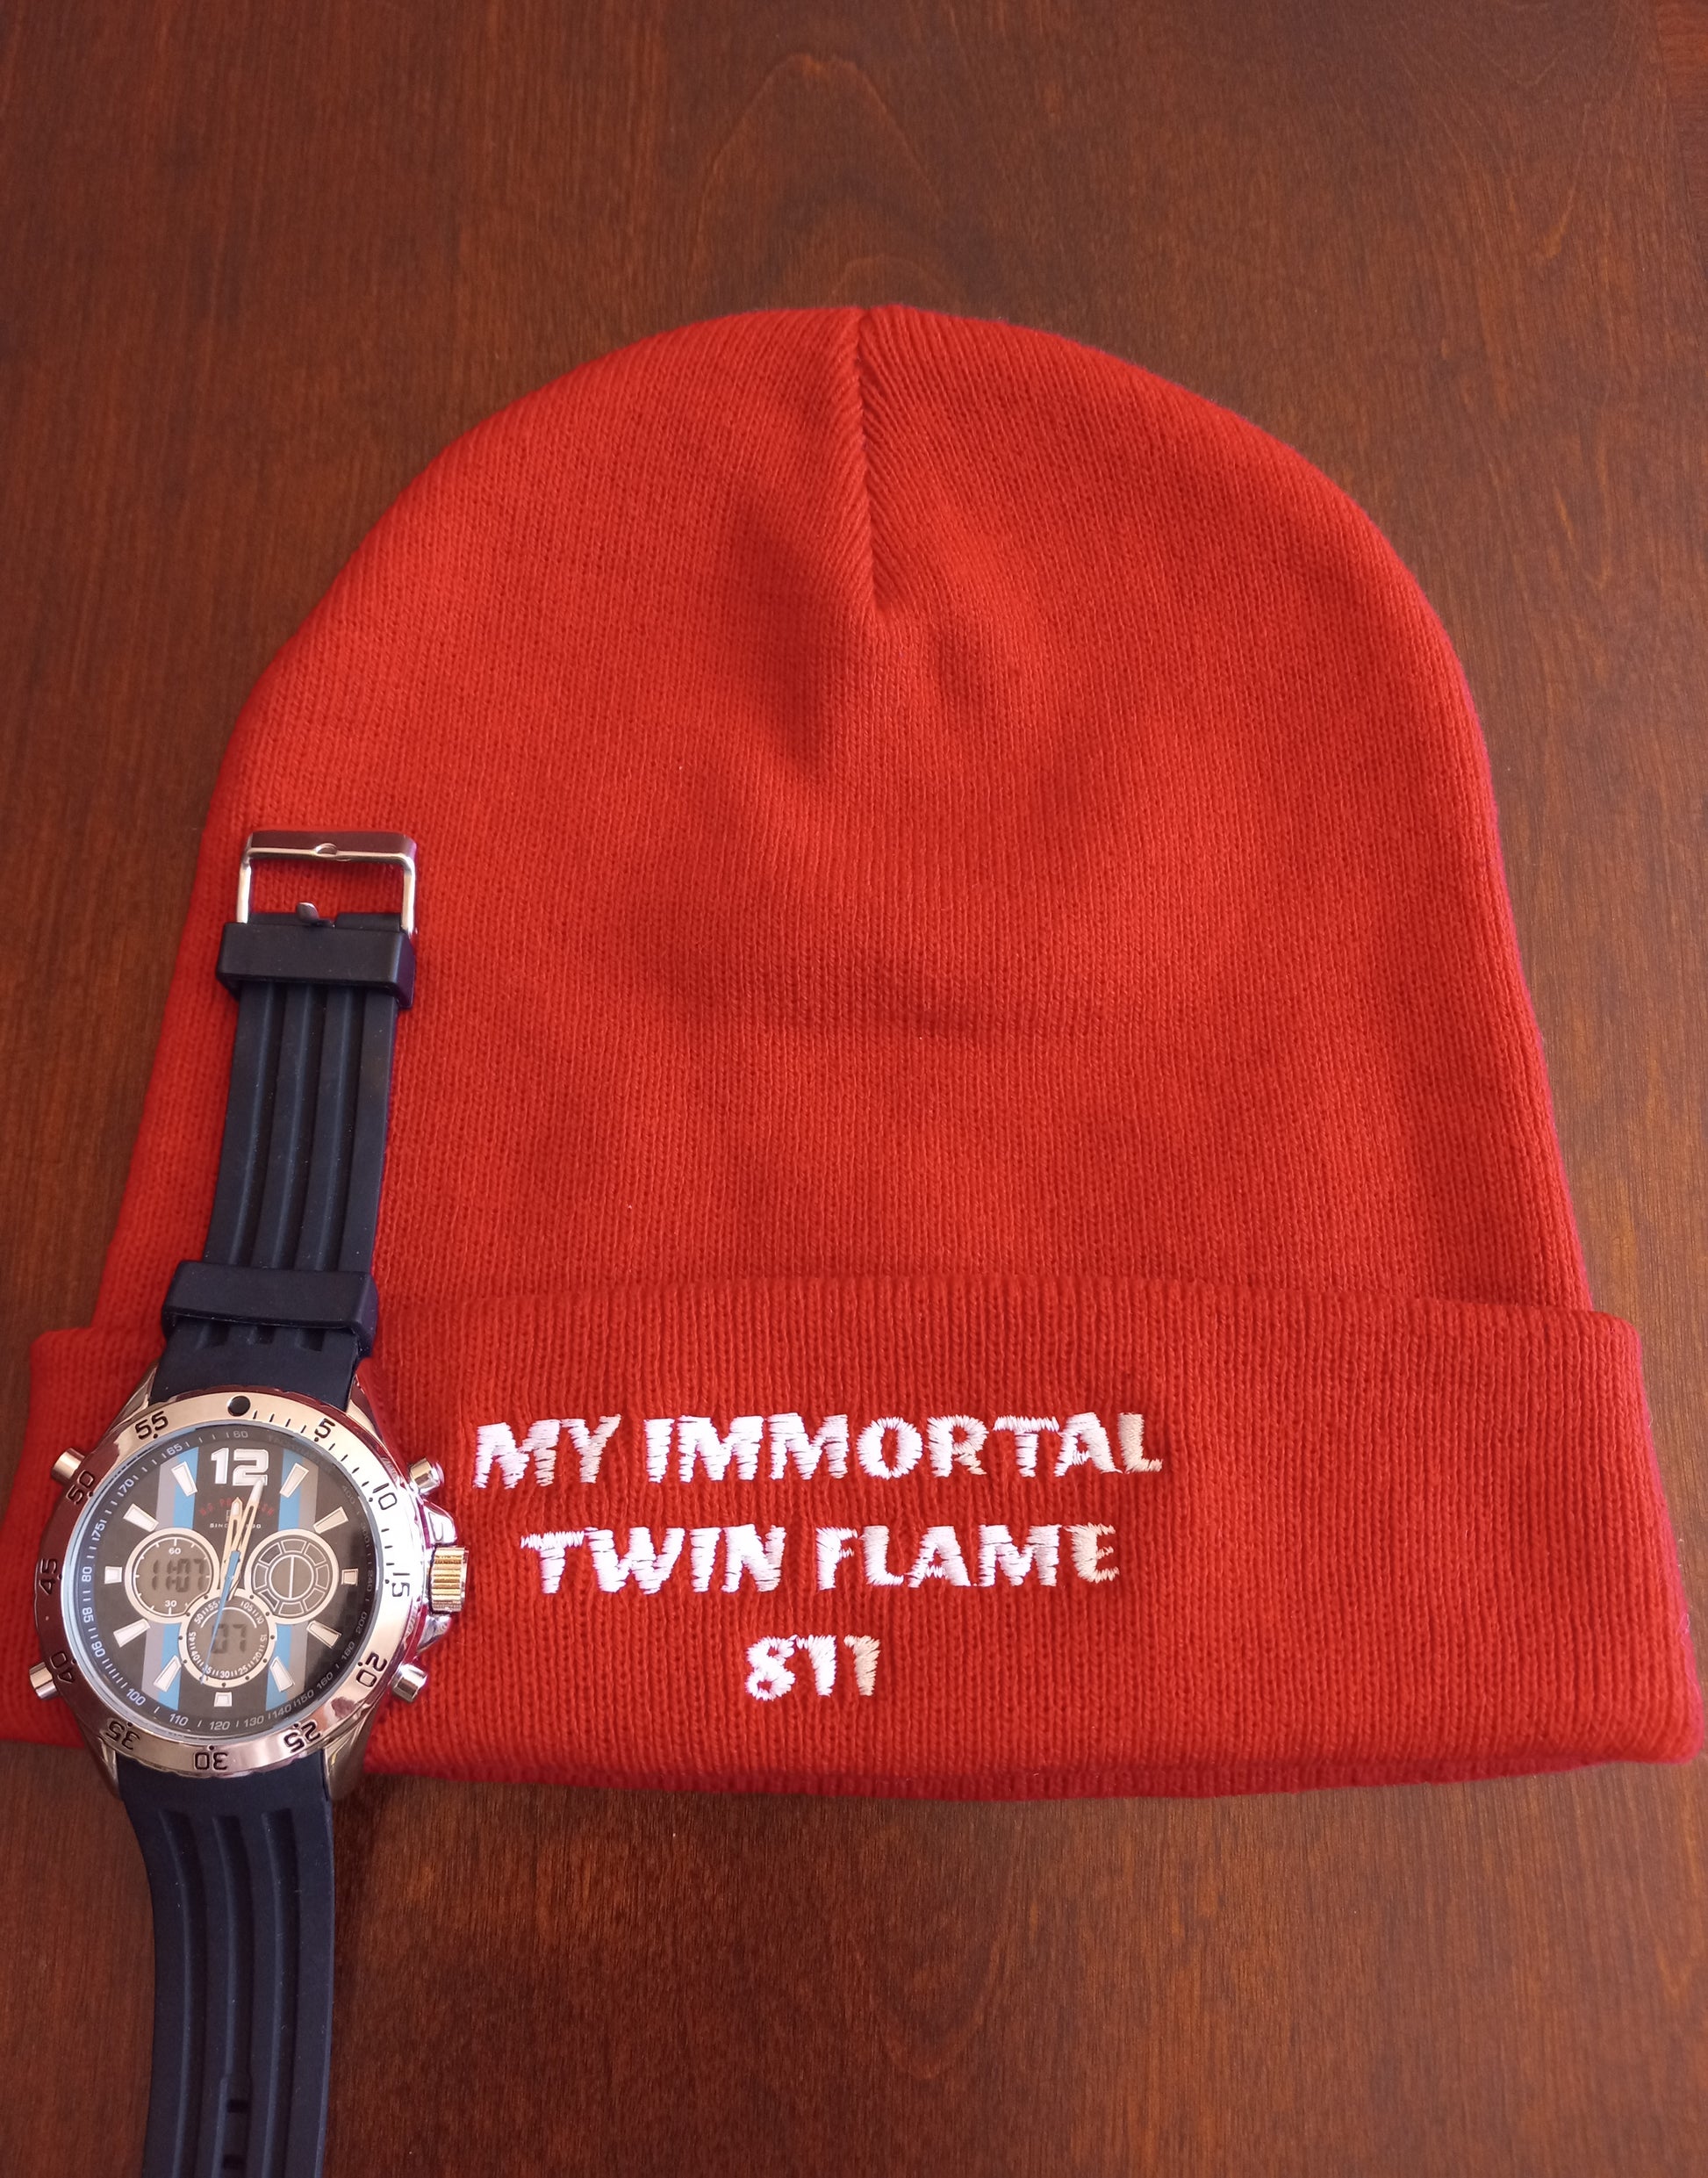 Red and white knit beanie with original tagline. "My Immortal Twin Flame 811." Shown with a watch. JAMILLIAH'S WISDOM IS TIMELESS SHOP - wisdomistimeless.com.